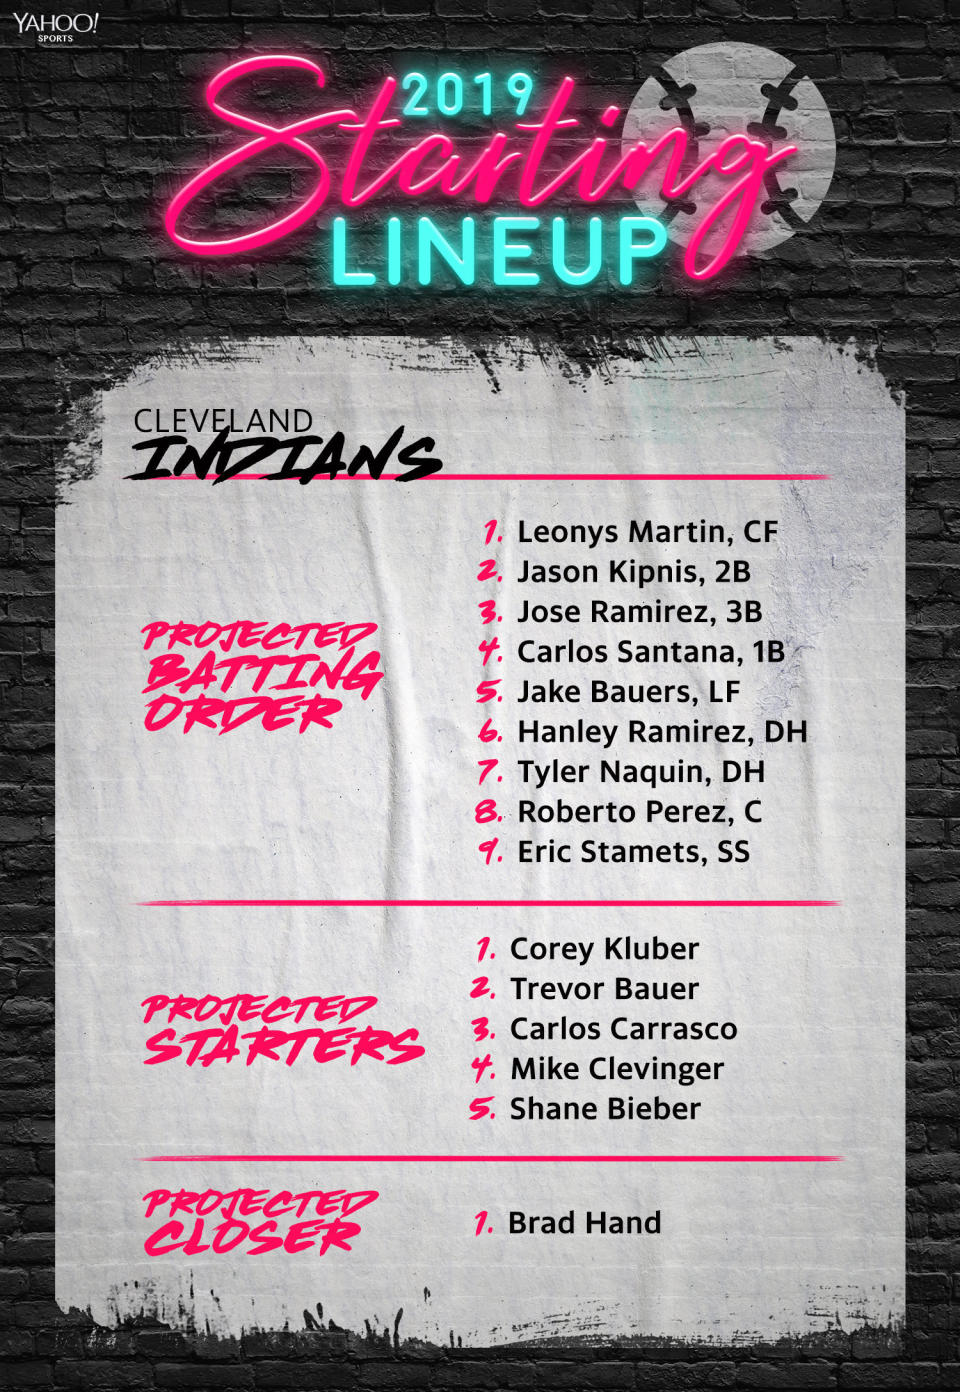 The Cleveland Indians projected lineup for 2019. (Yahoo Sports)